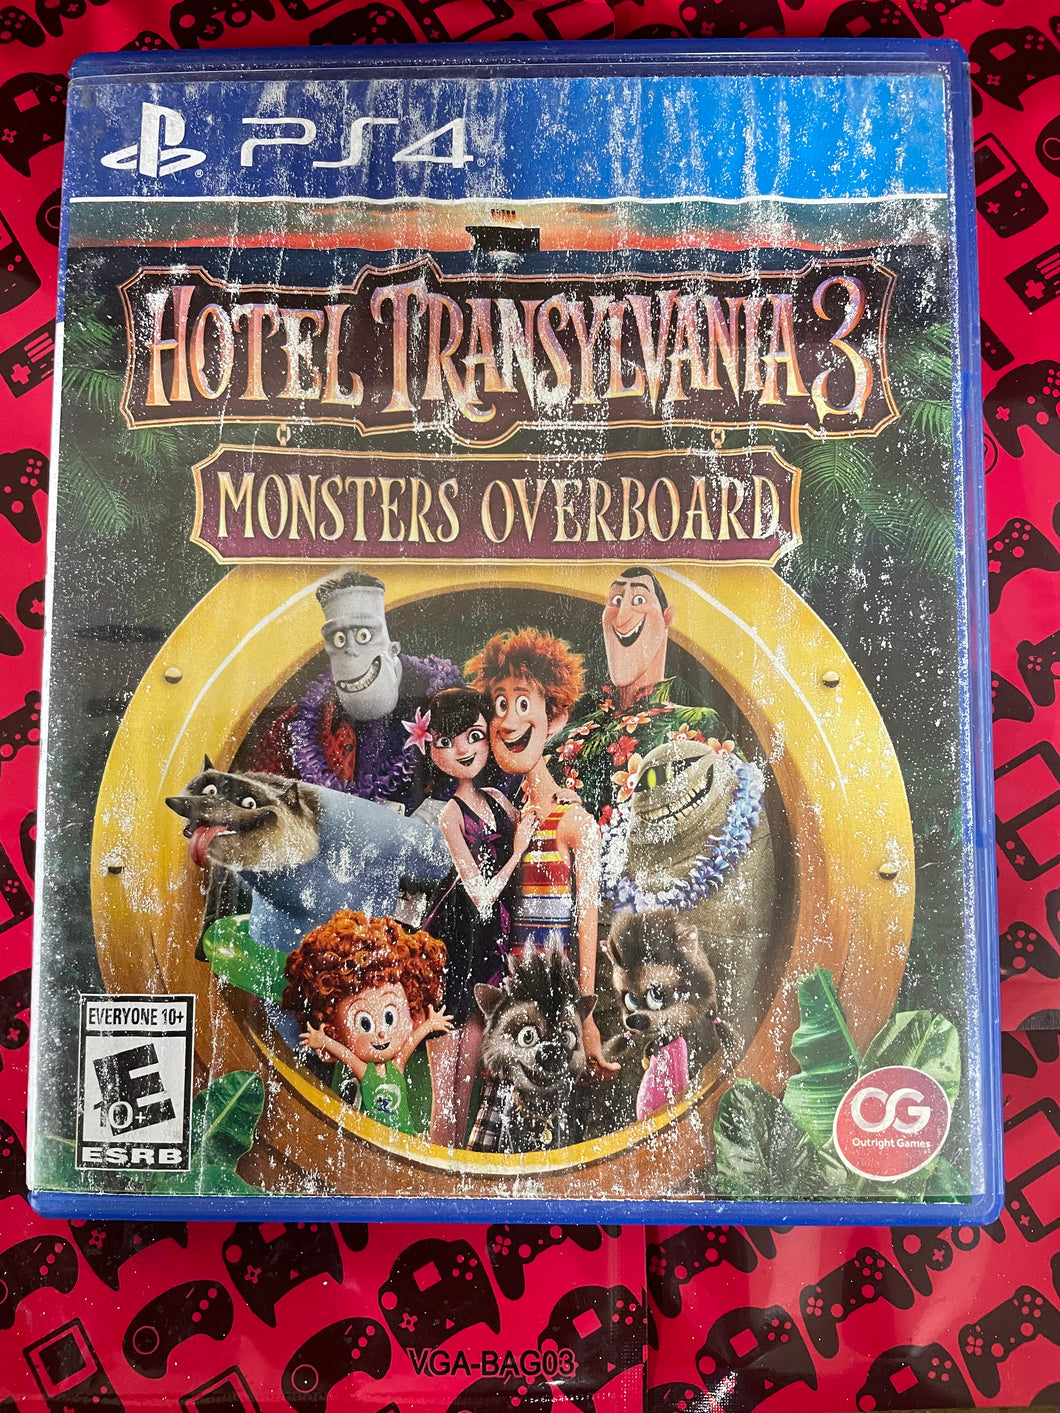 Hotel Transylvania 3: Monsters Overboard Playstation 4